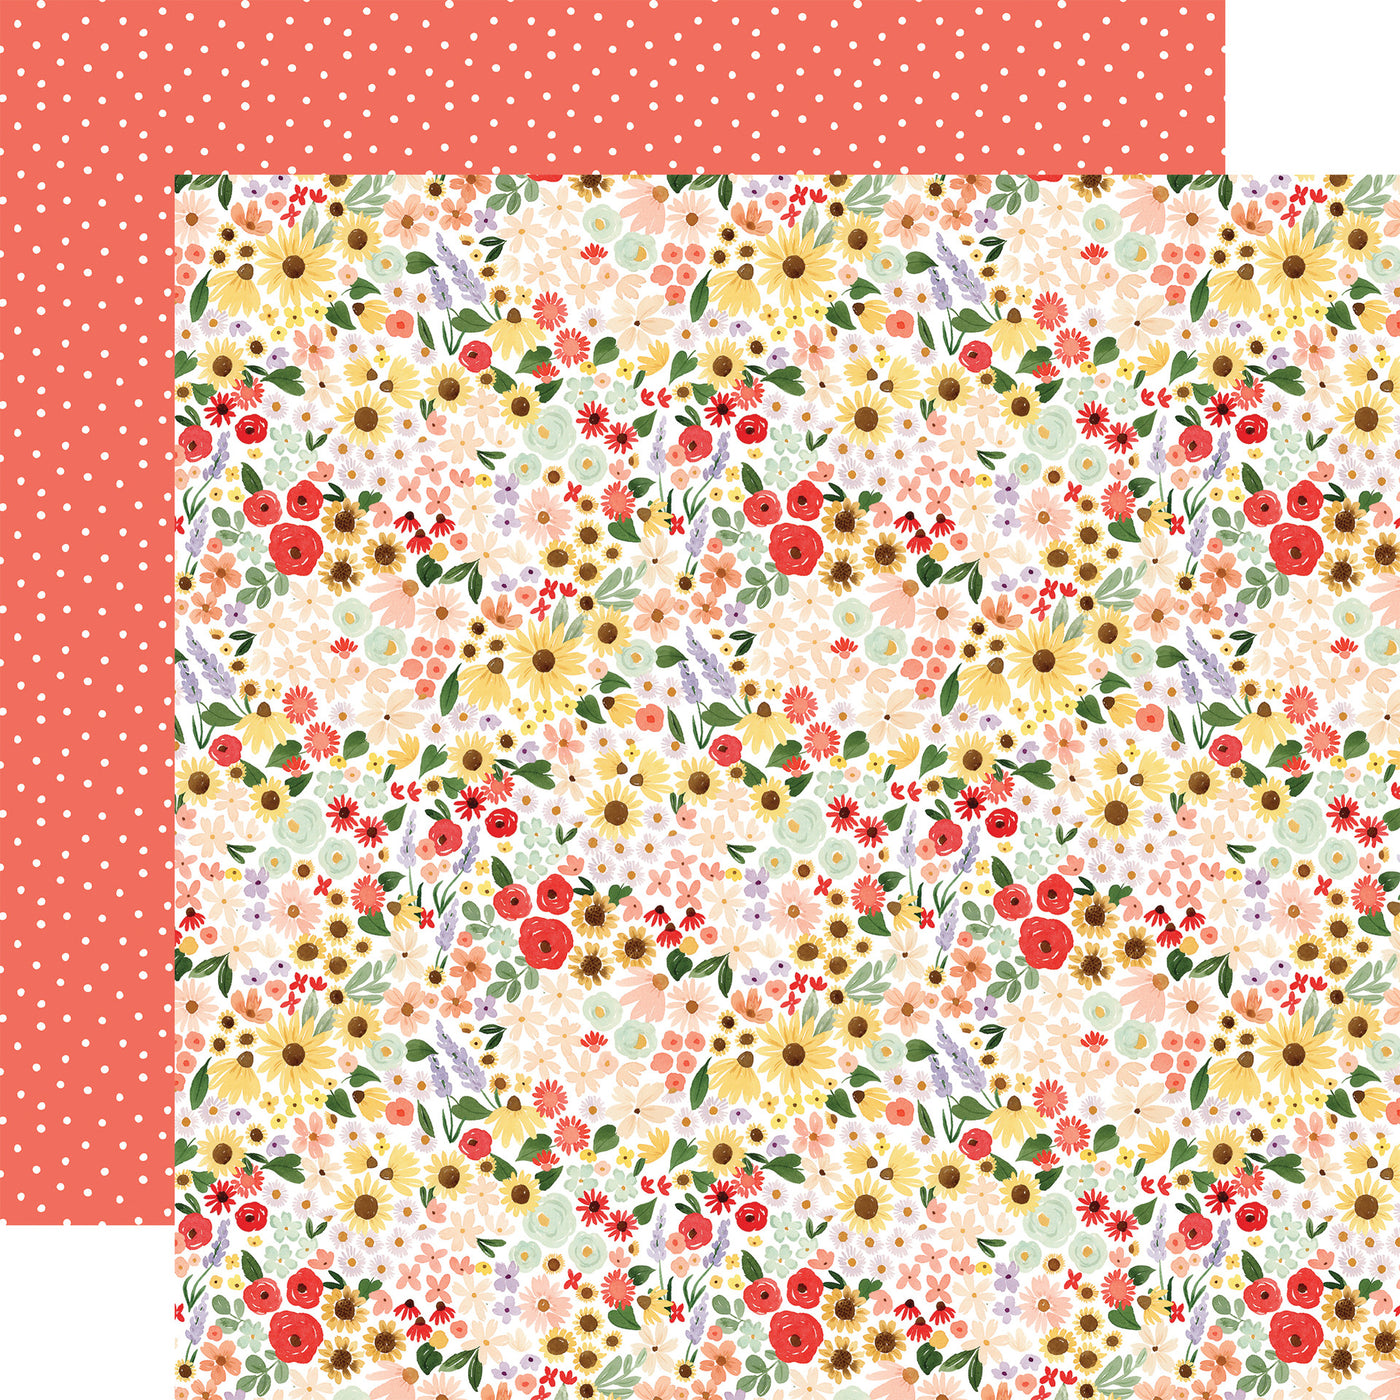 Double-sided 12x12: A beautiful watercolor floral pattern on a white background. The reverse is small white polka dots on a coral background. 80 lb cover. Felt texture.